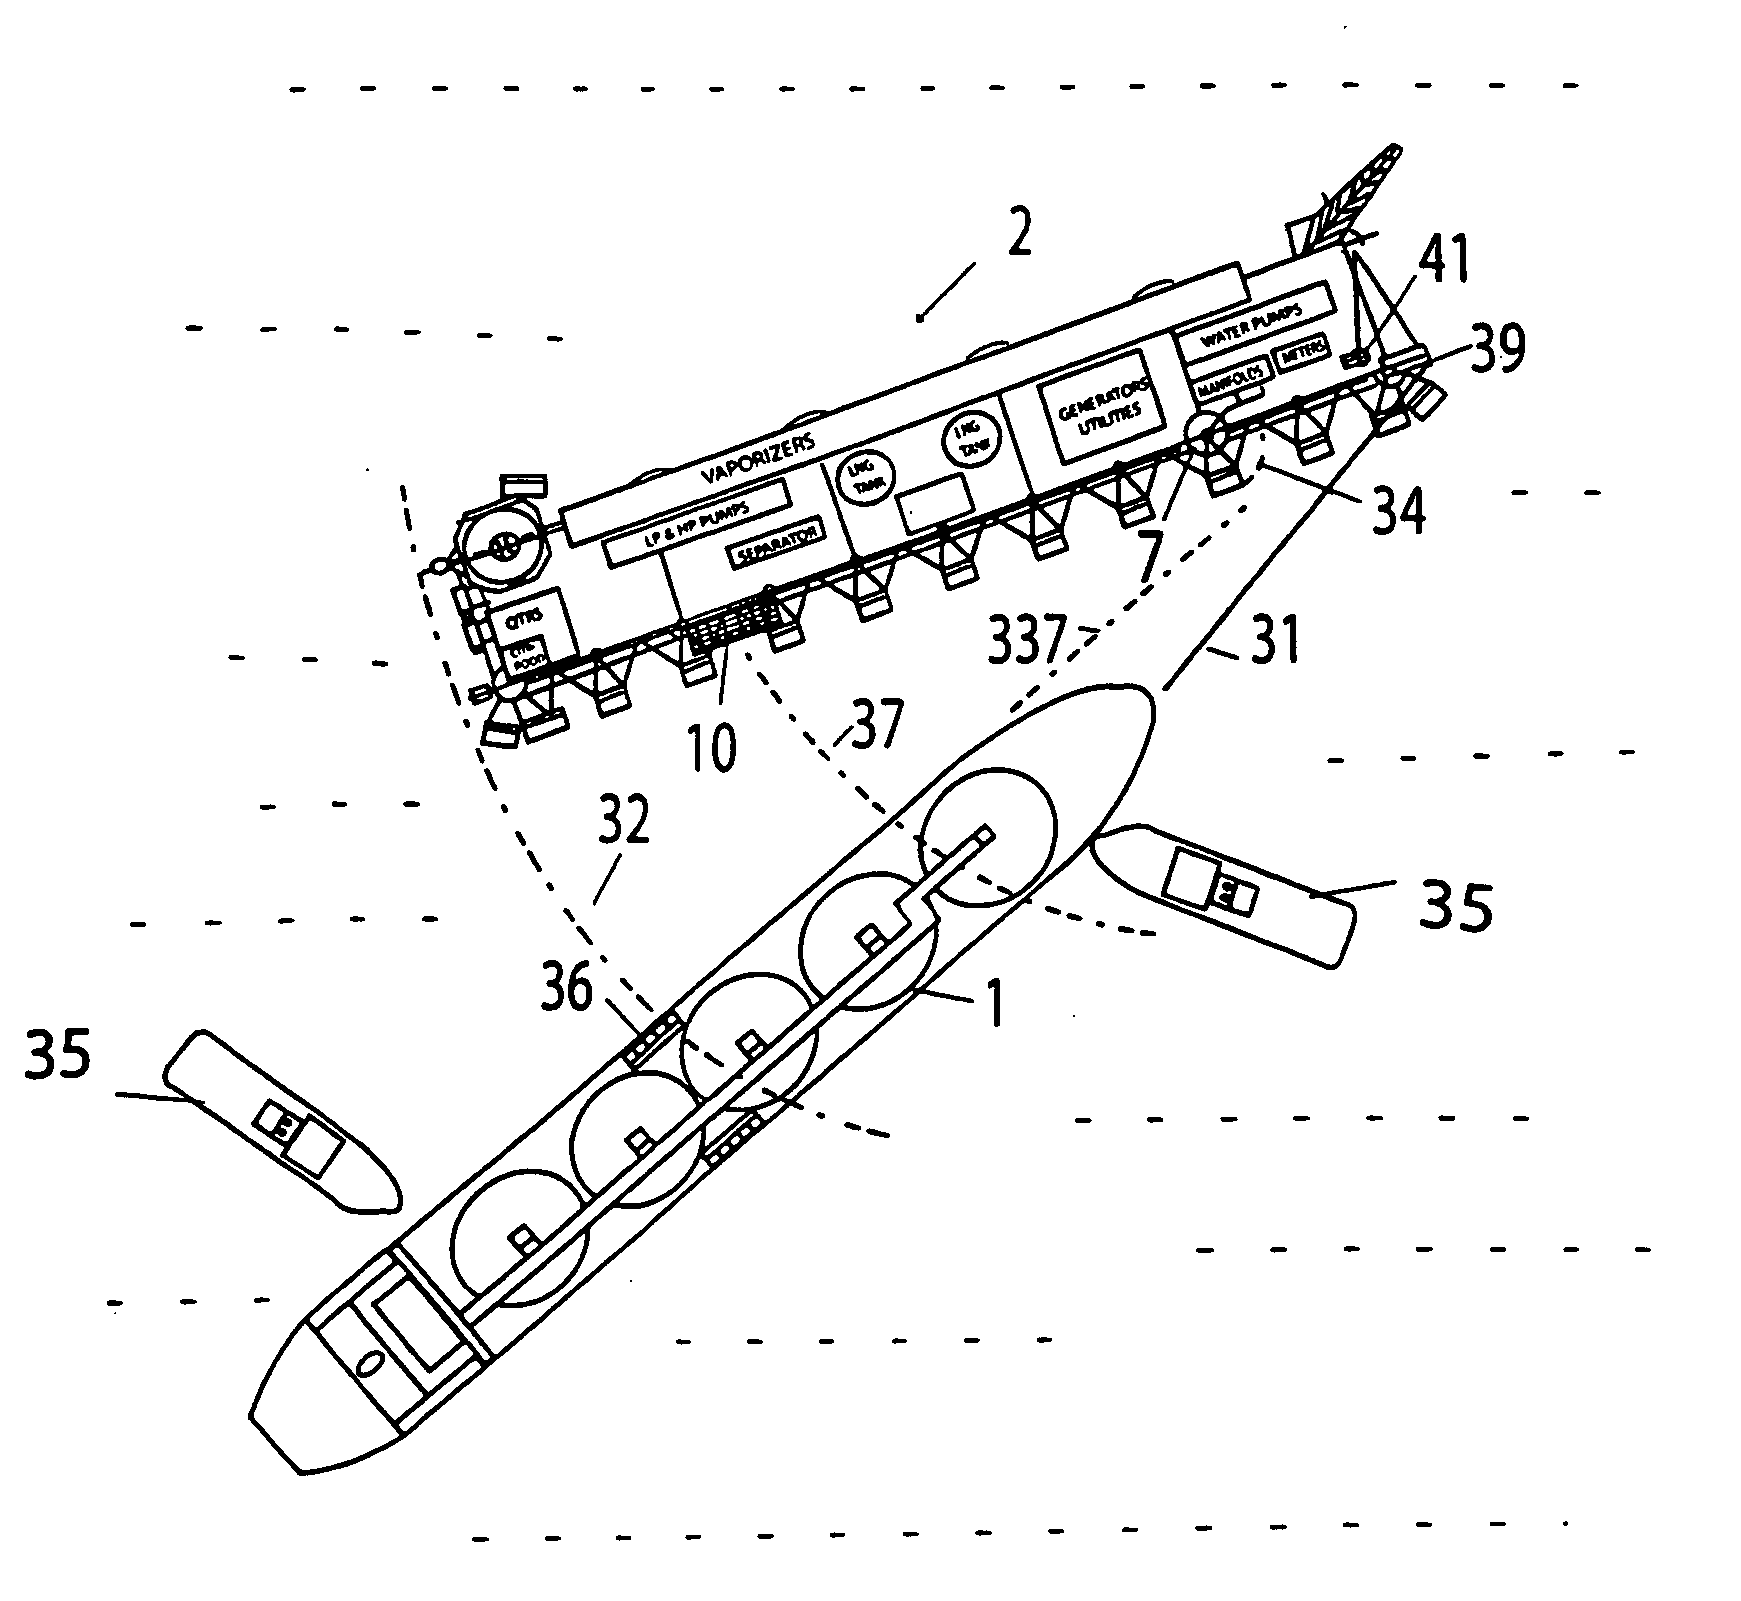 Floating LNG import terminal and method for docking